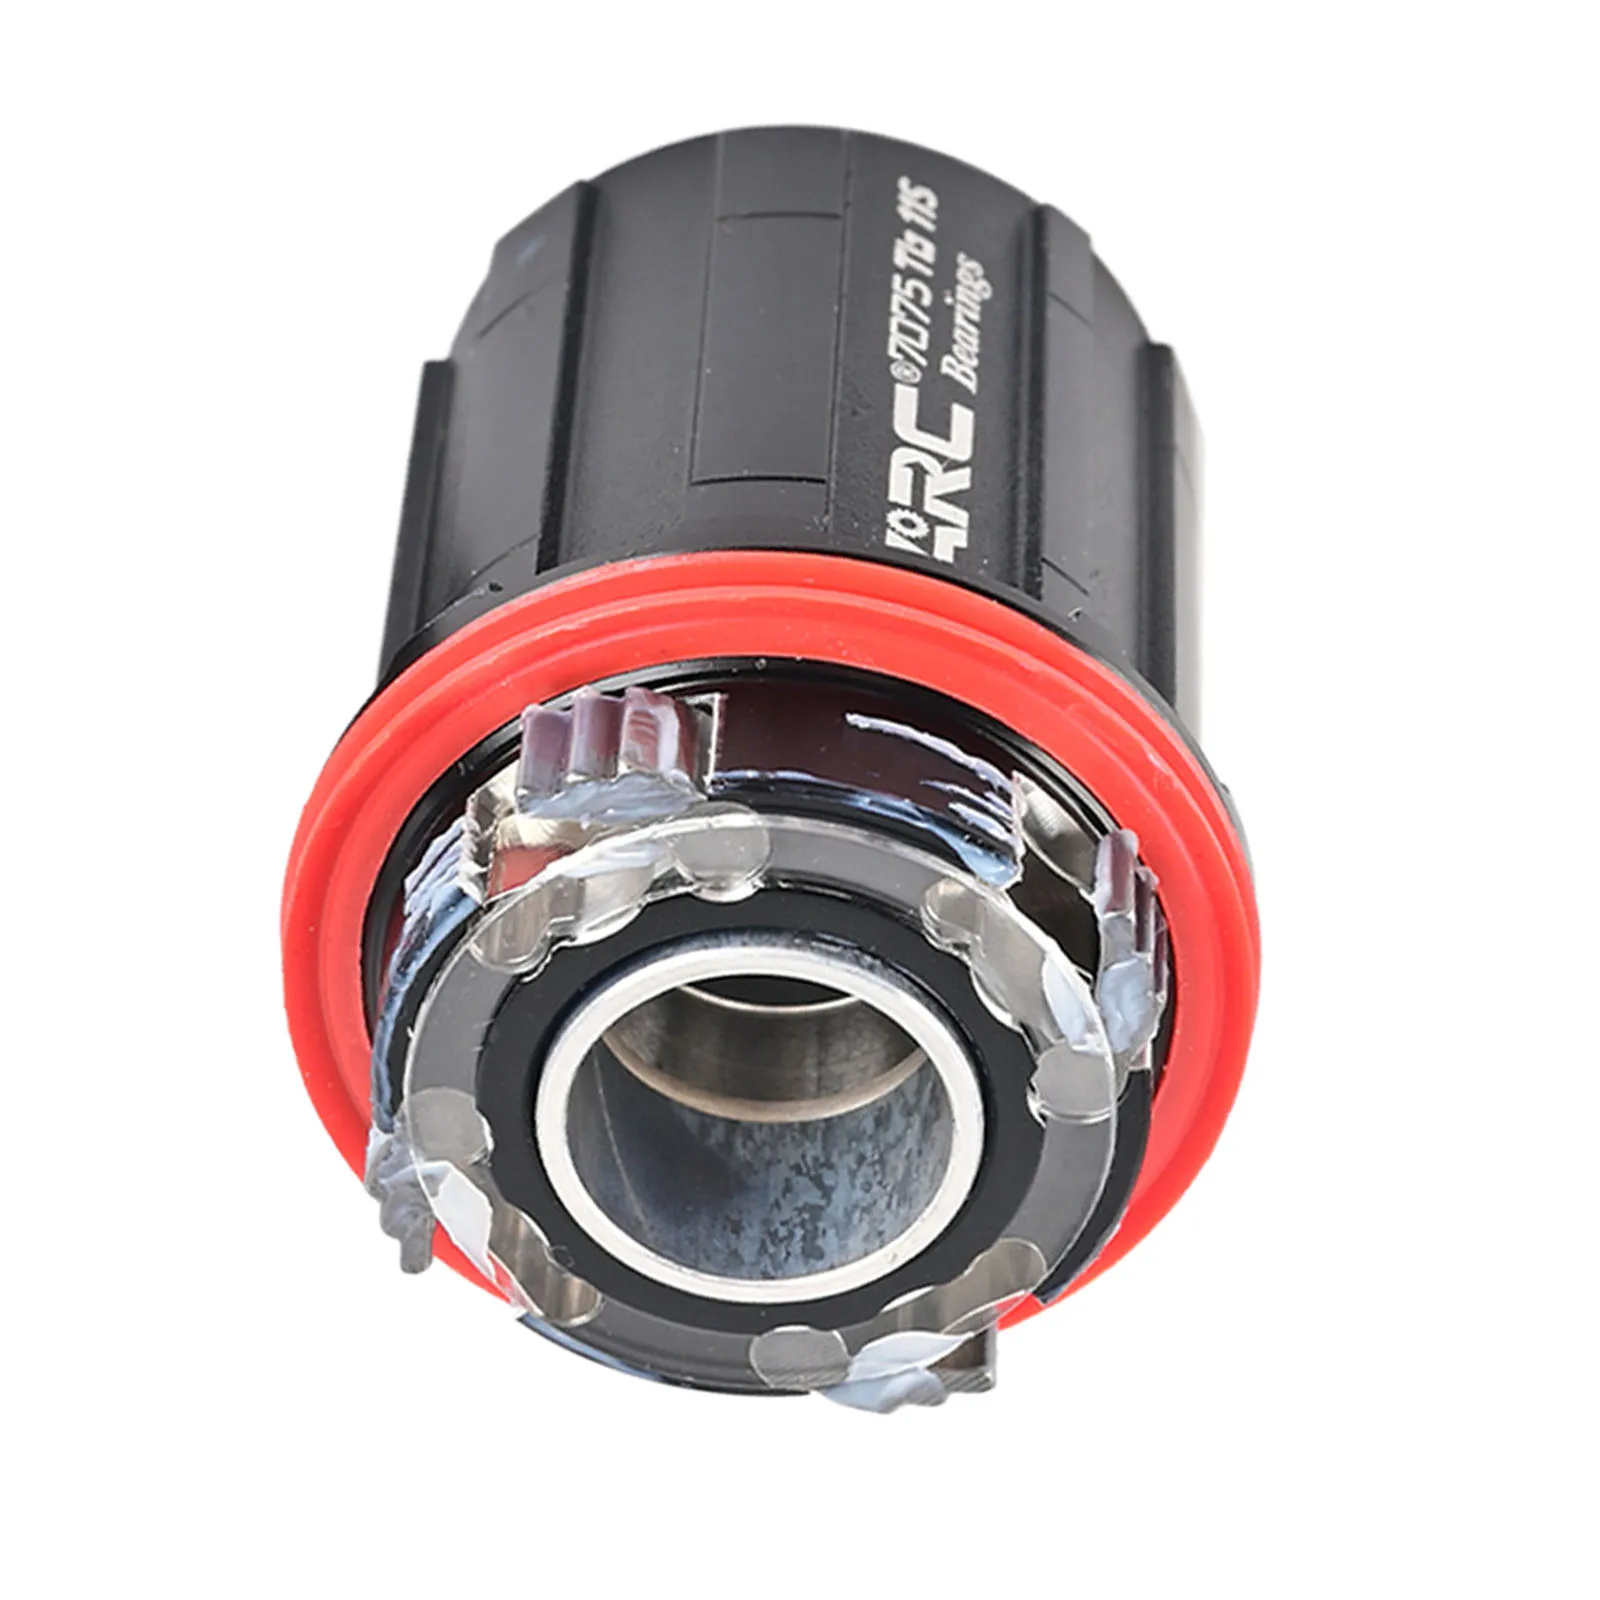 Bike Freehub Body Free Hub Adapter Compatible with Shimano Adaptor Parts